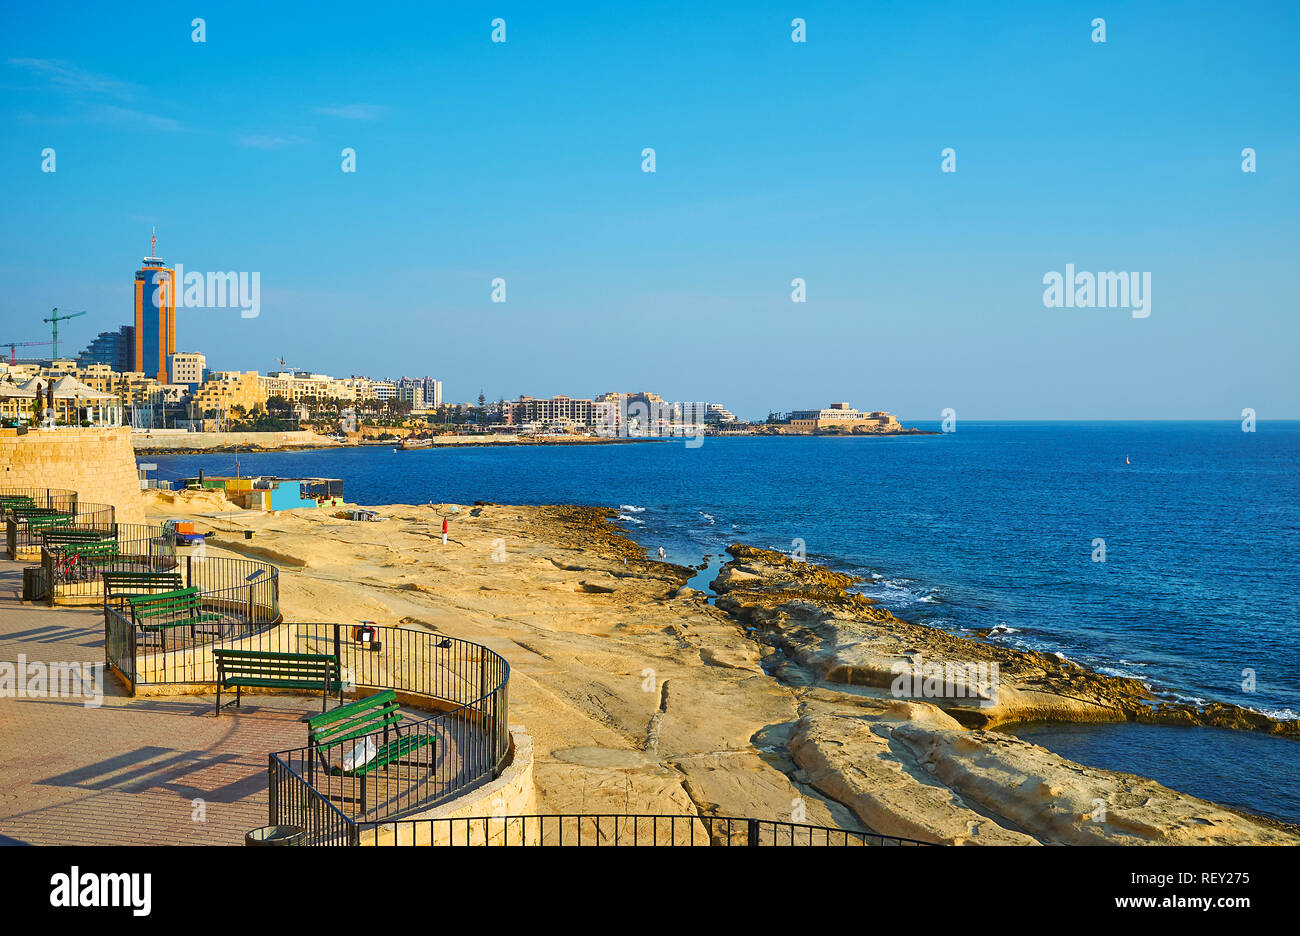 The nice seaside recreation area with benches on the rocky coast of Sliema with a view on the modern buildings of St Julians, Malta. Stock Photo